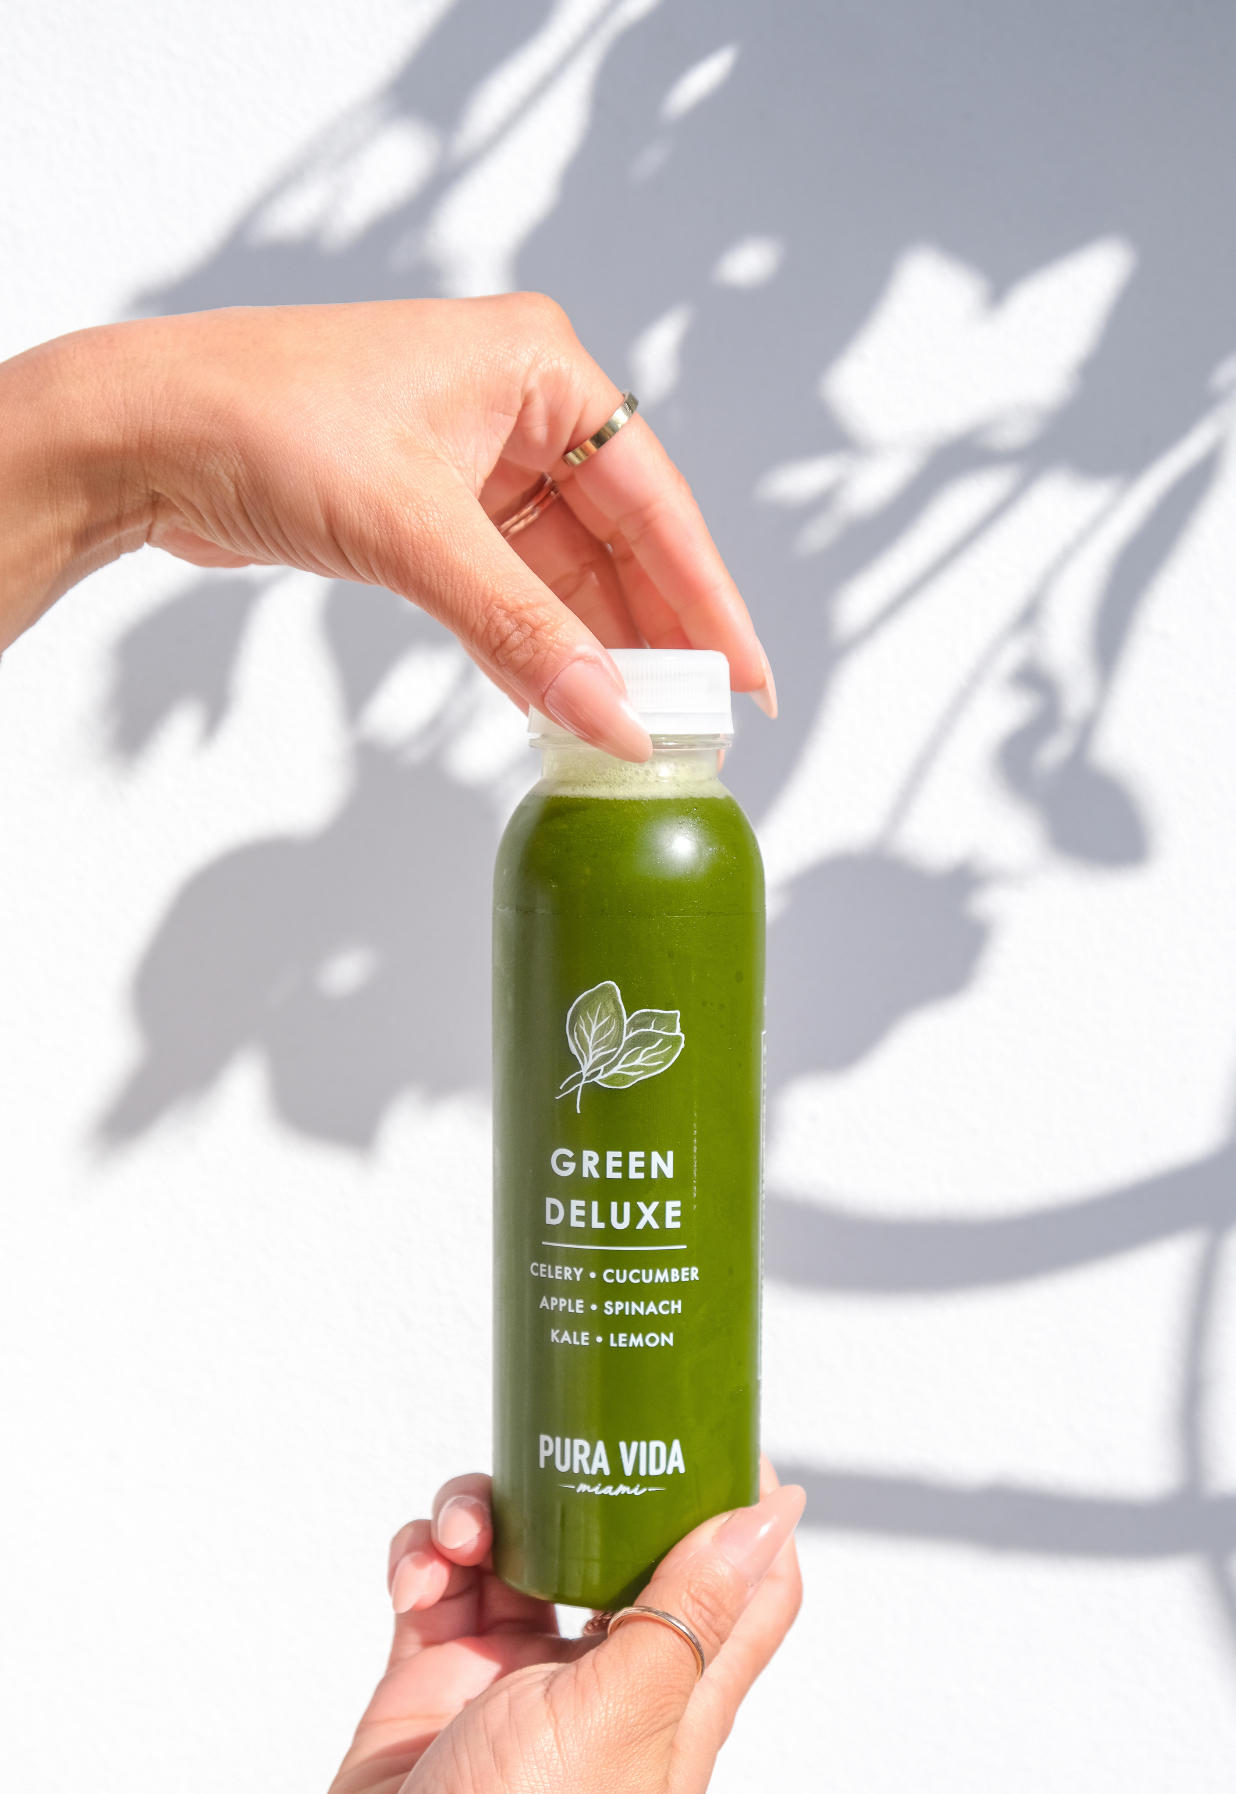 Cold press Green Deluxe juice